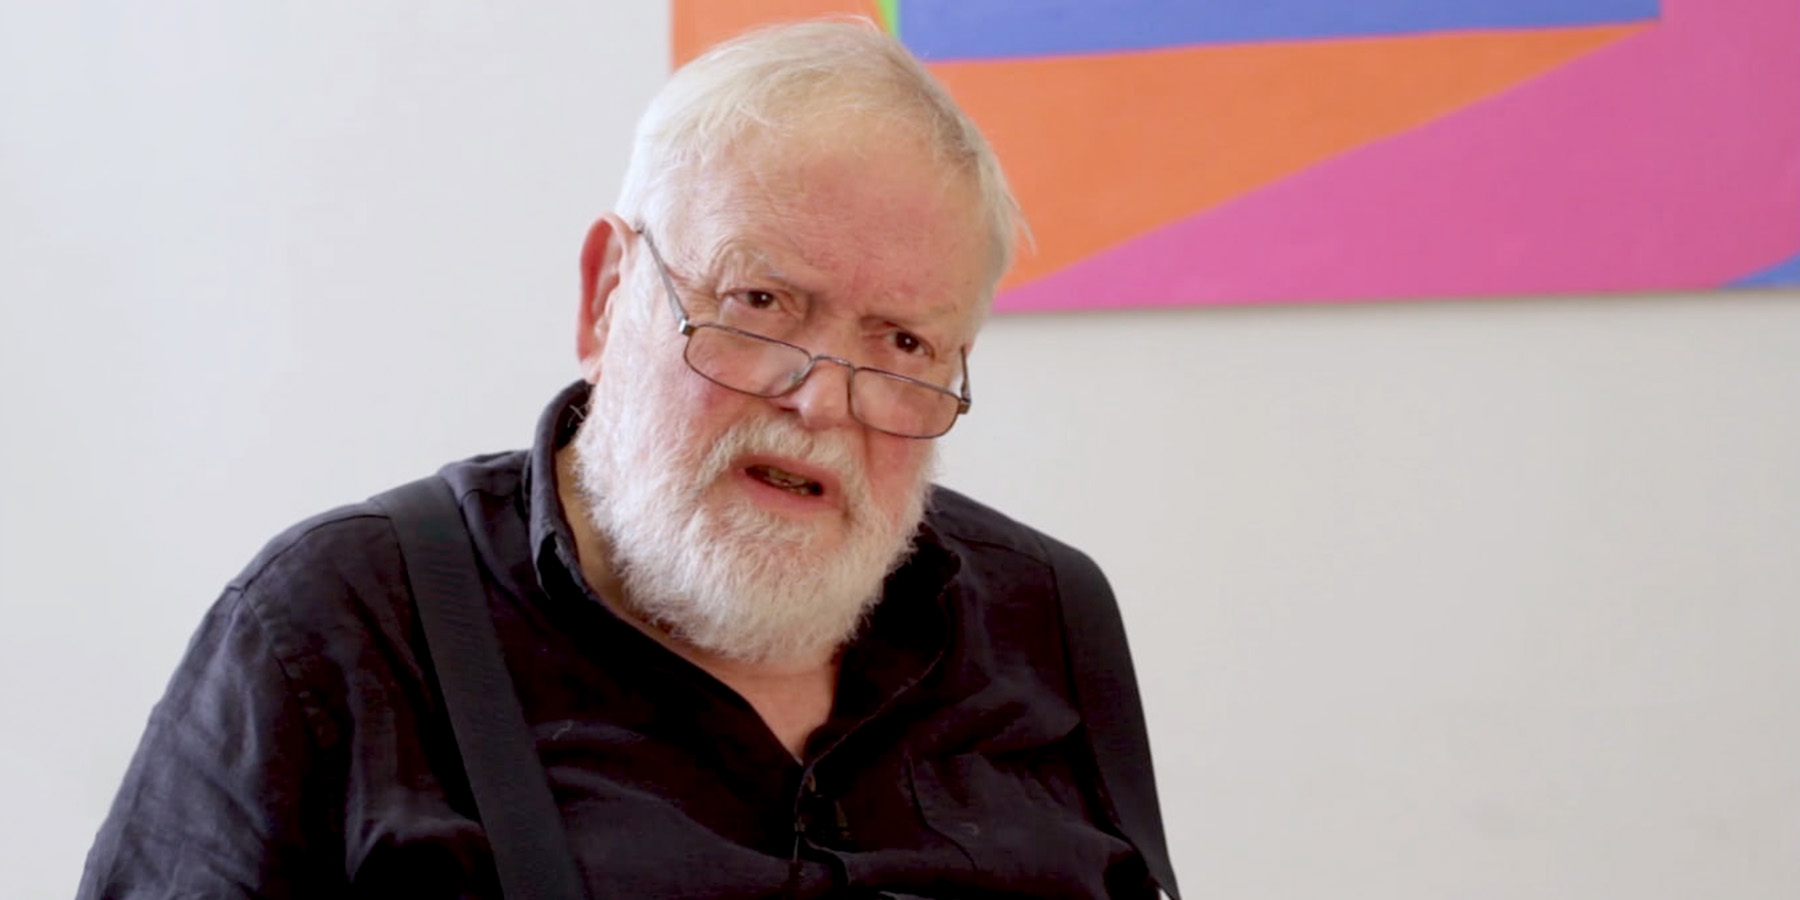 ‘We’re very lucky on this island to have two languages’ arsa Michael Longley. Áiméan agus shalom…